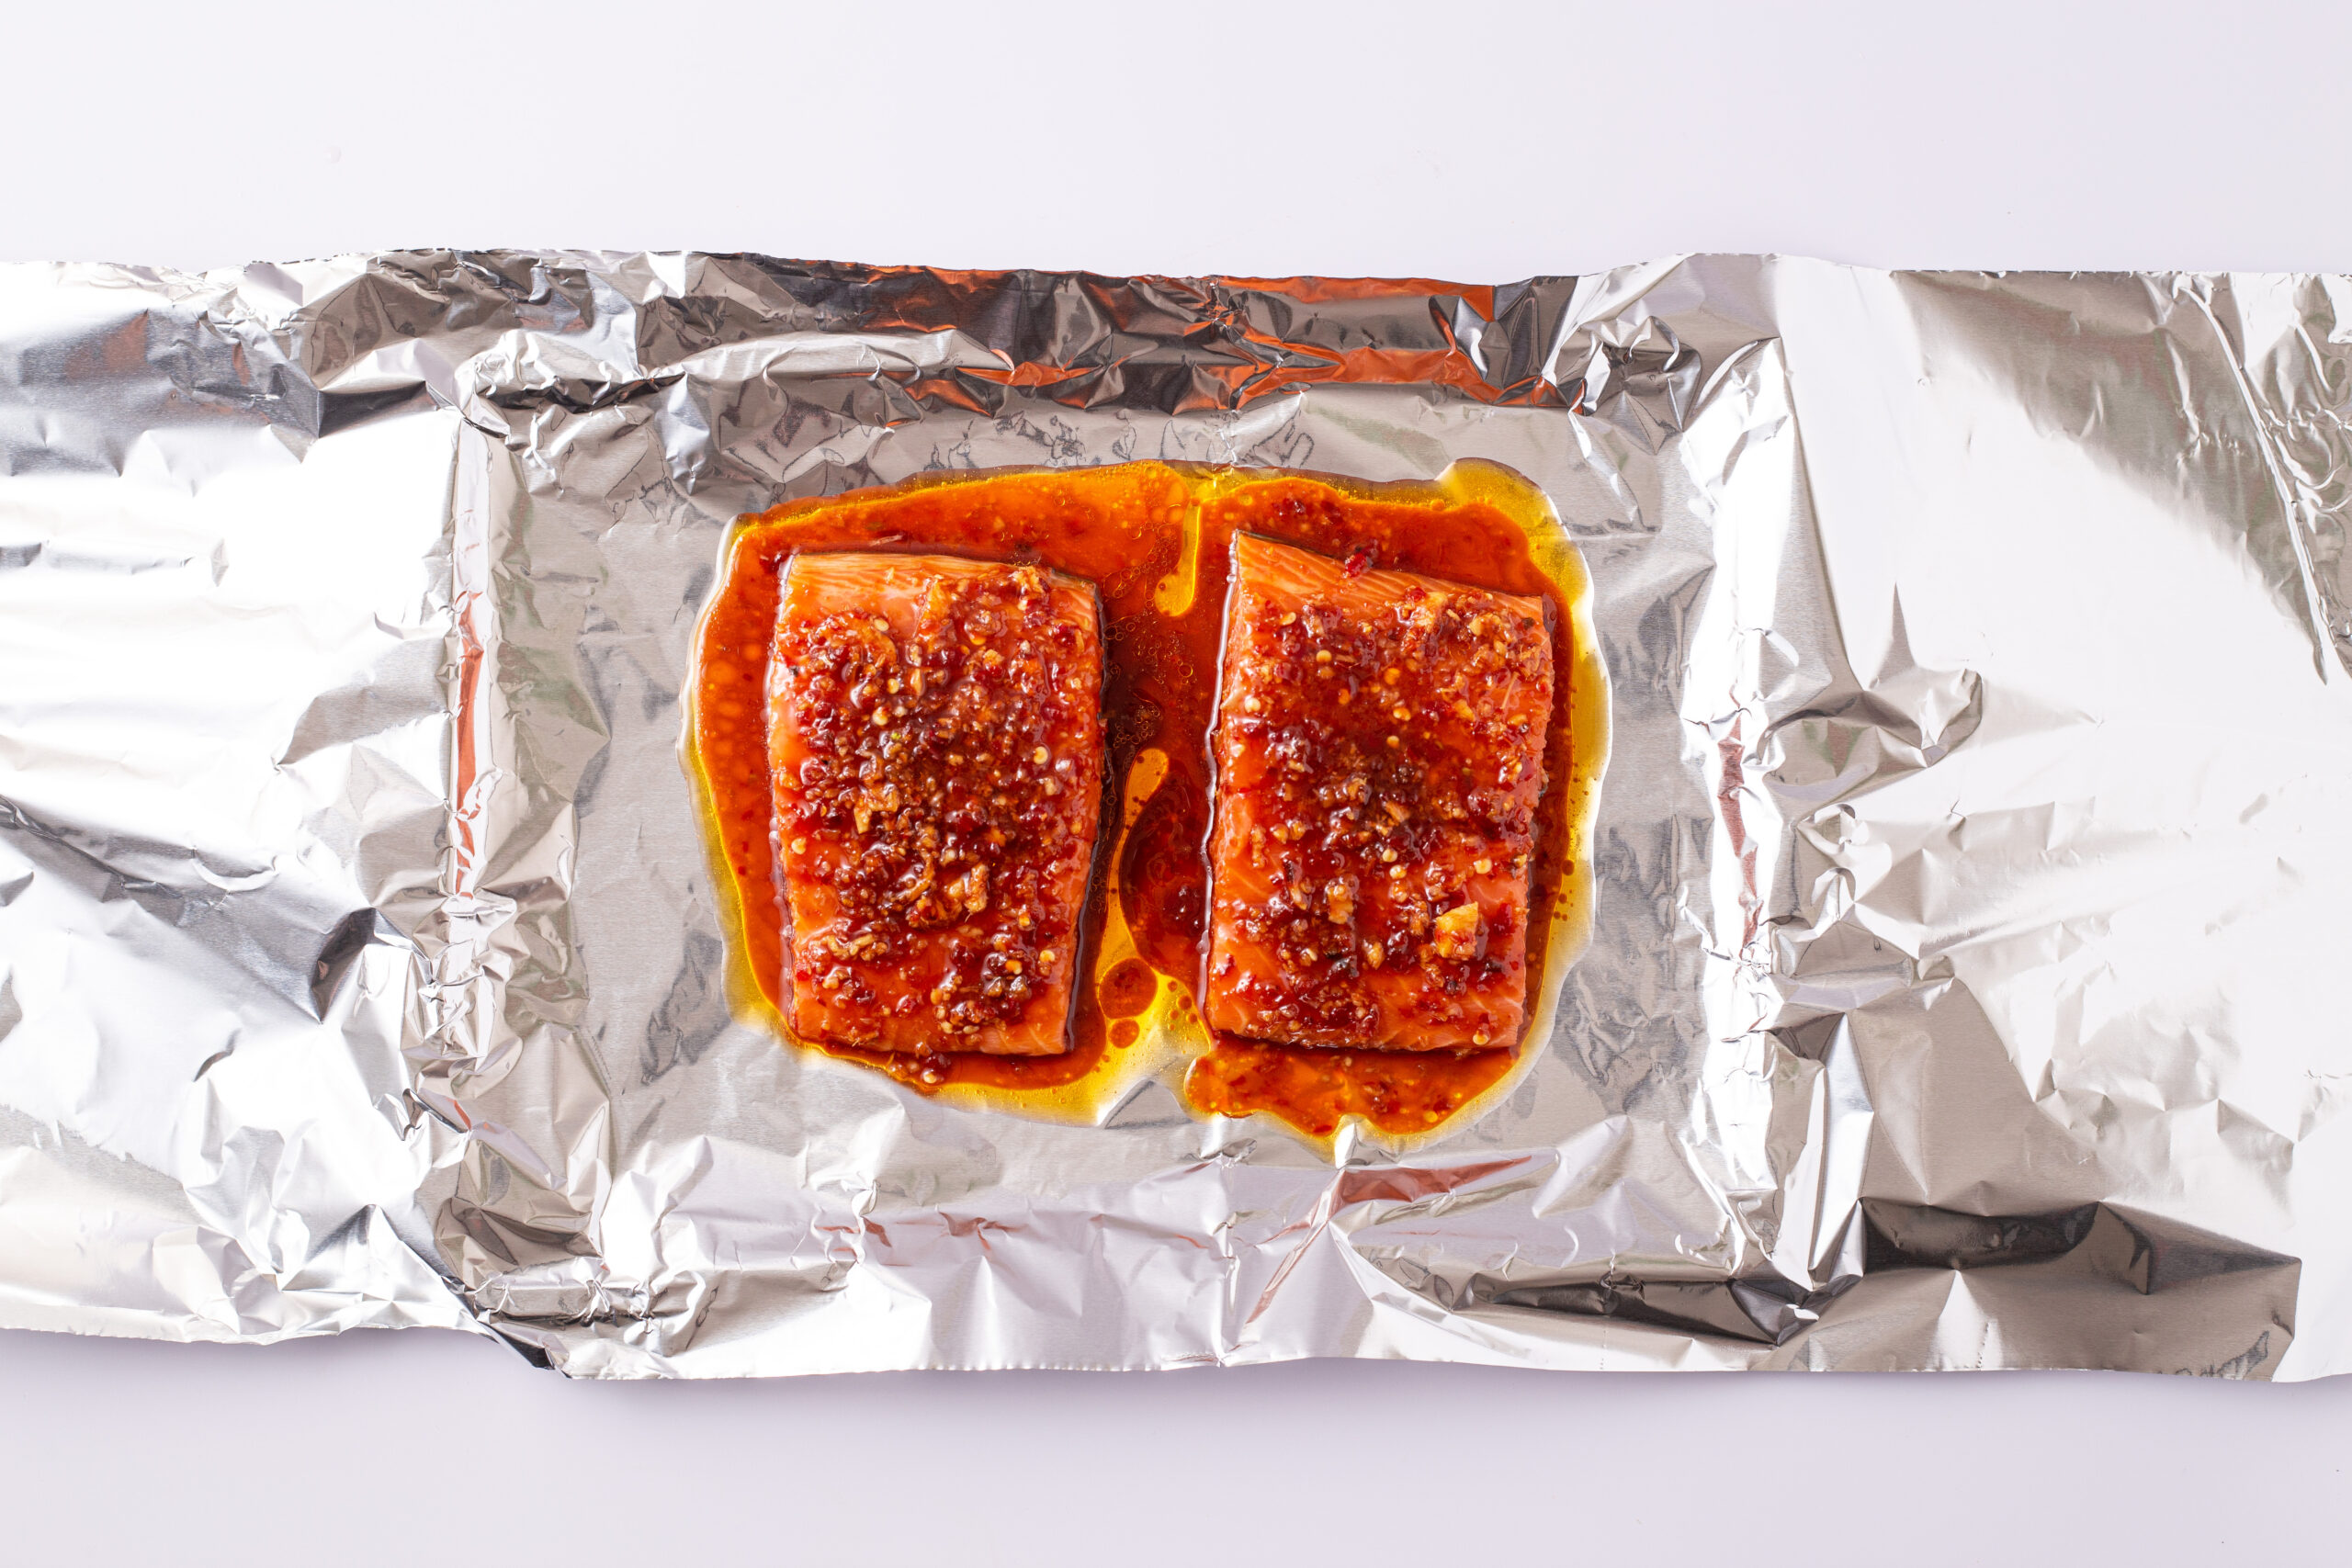 Cooked salmon on a prepared baking sheet.